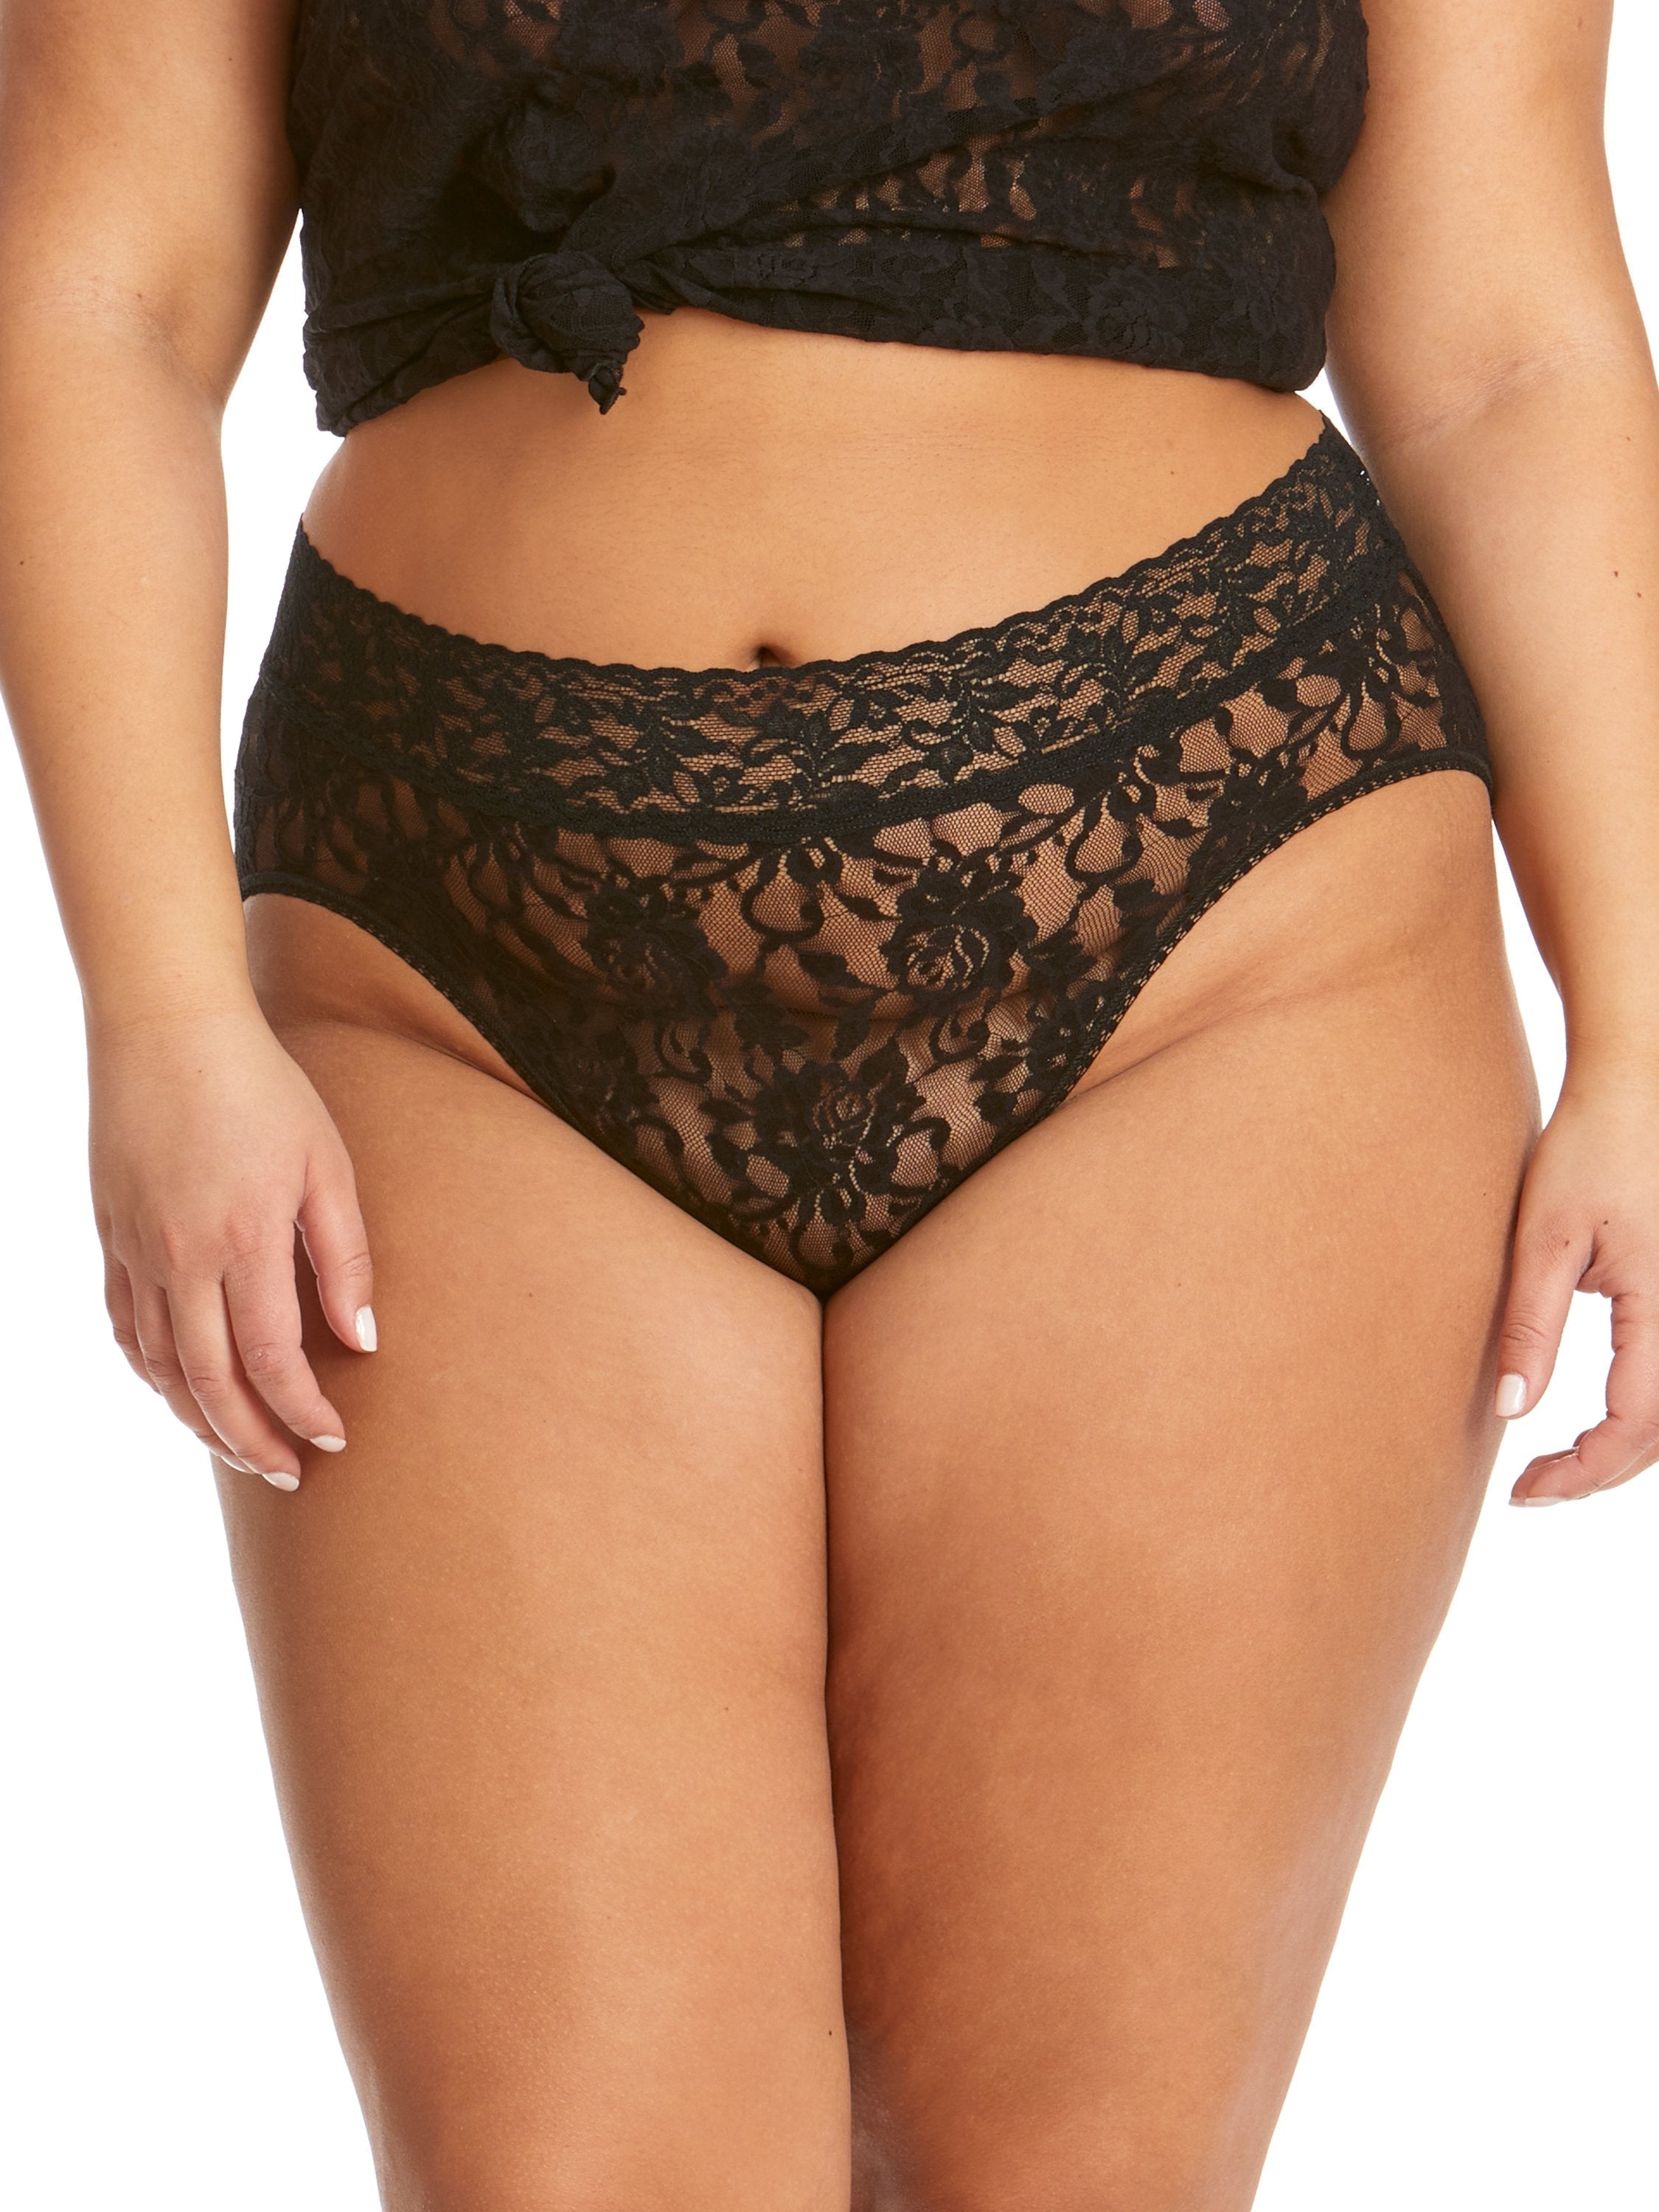 PHOLEEY Womens Sexy Underwear Lace Panties High Waisted Plus Size